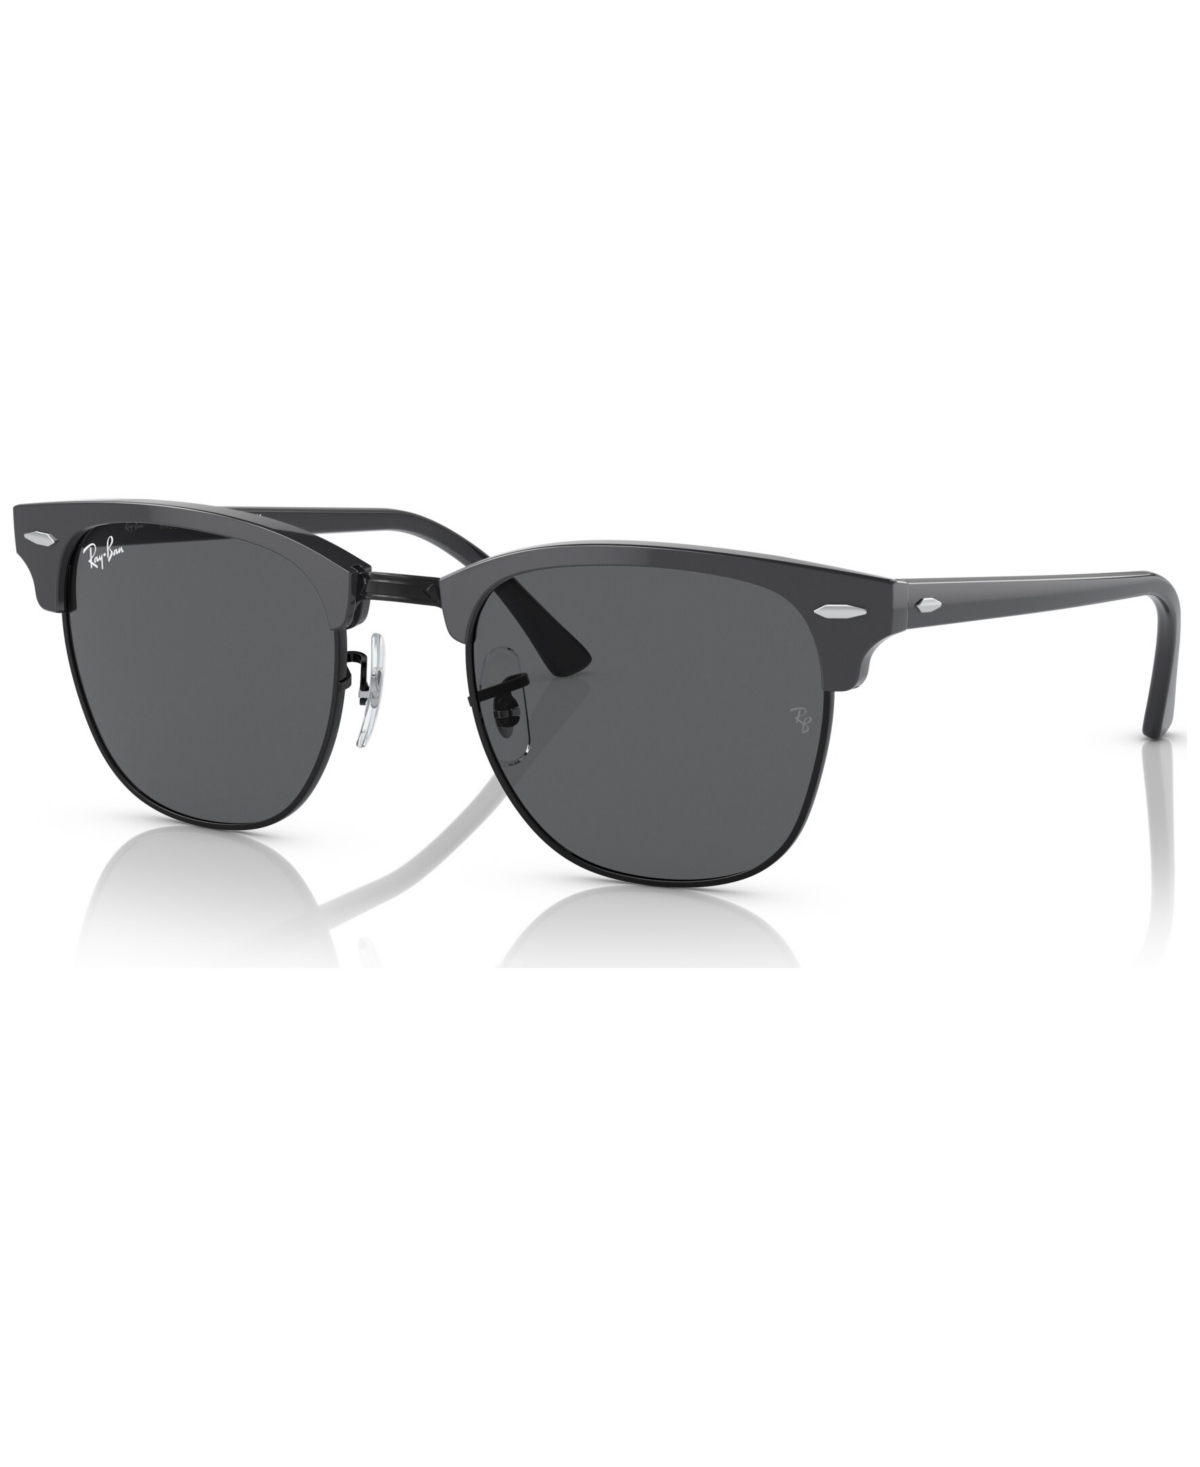 Ray Ban Sunglasses, Rb3016 Clubmaster In Gray On Black